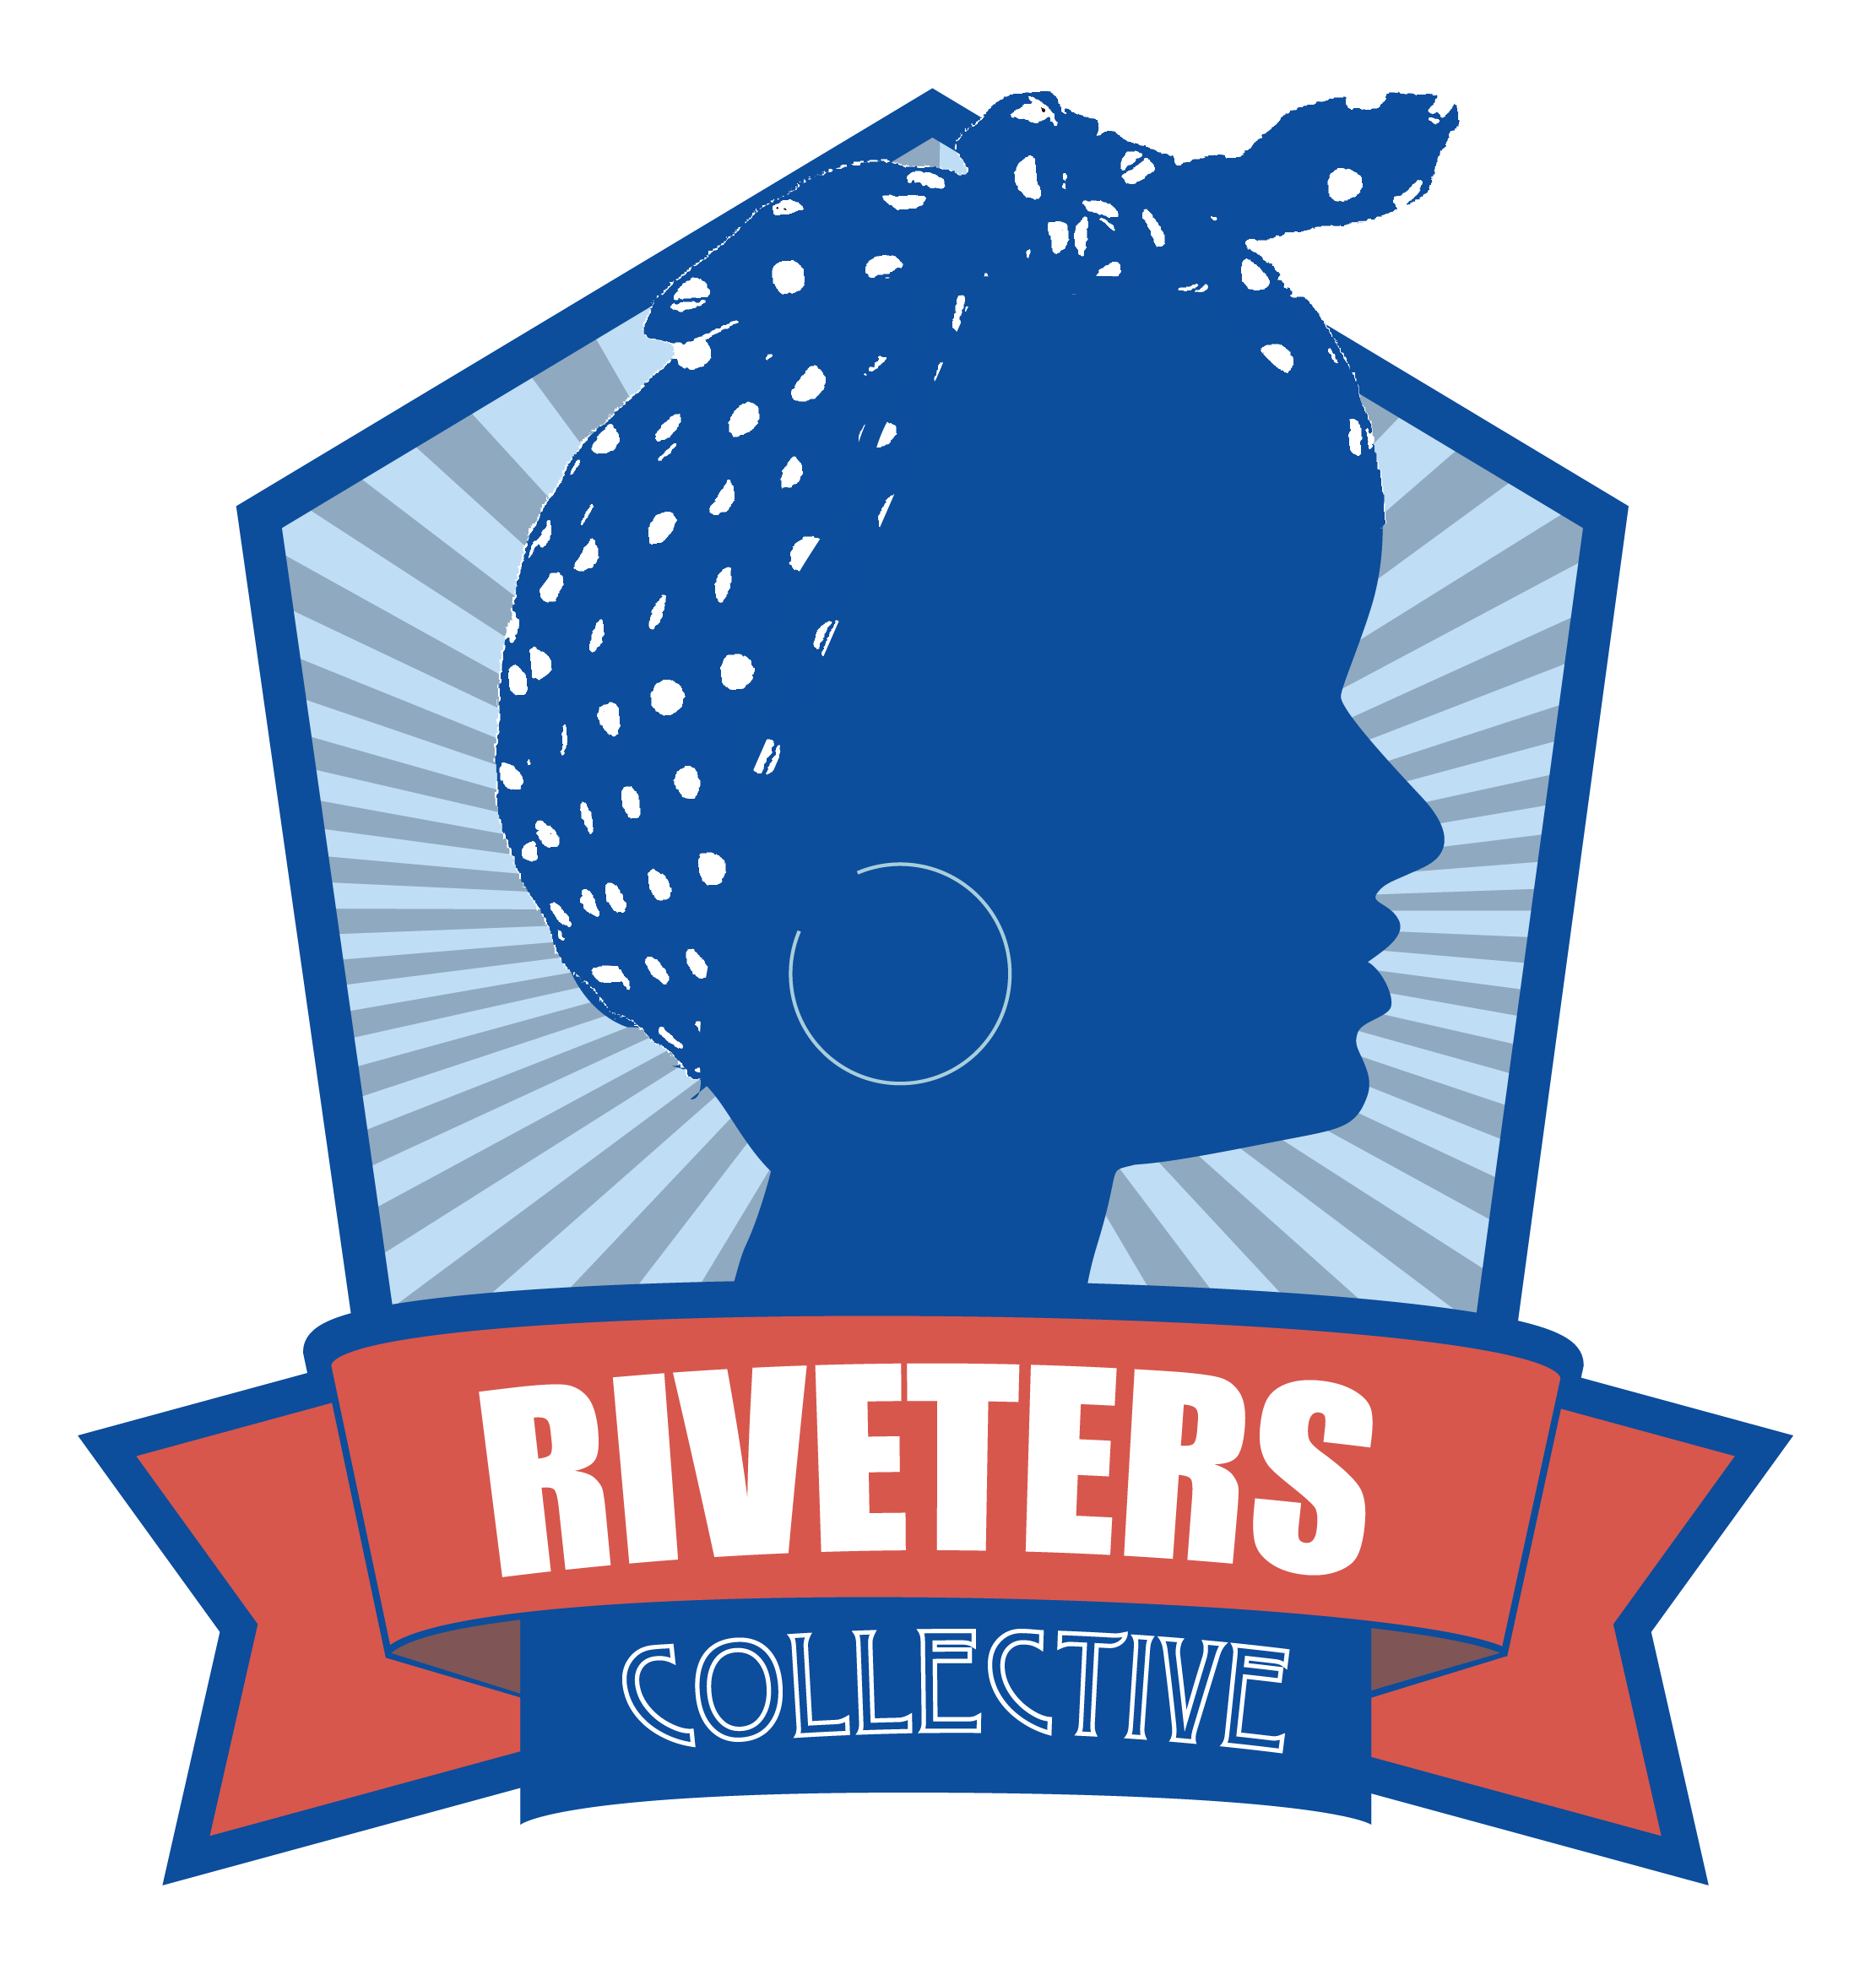 Riveters Collective.